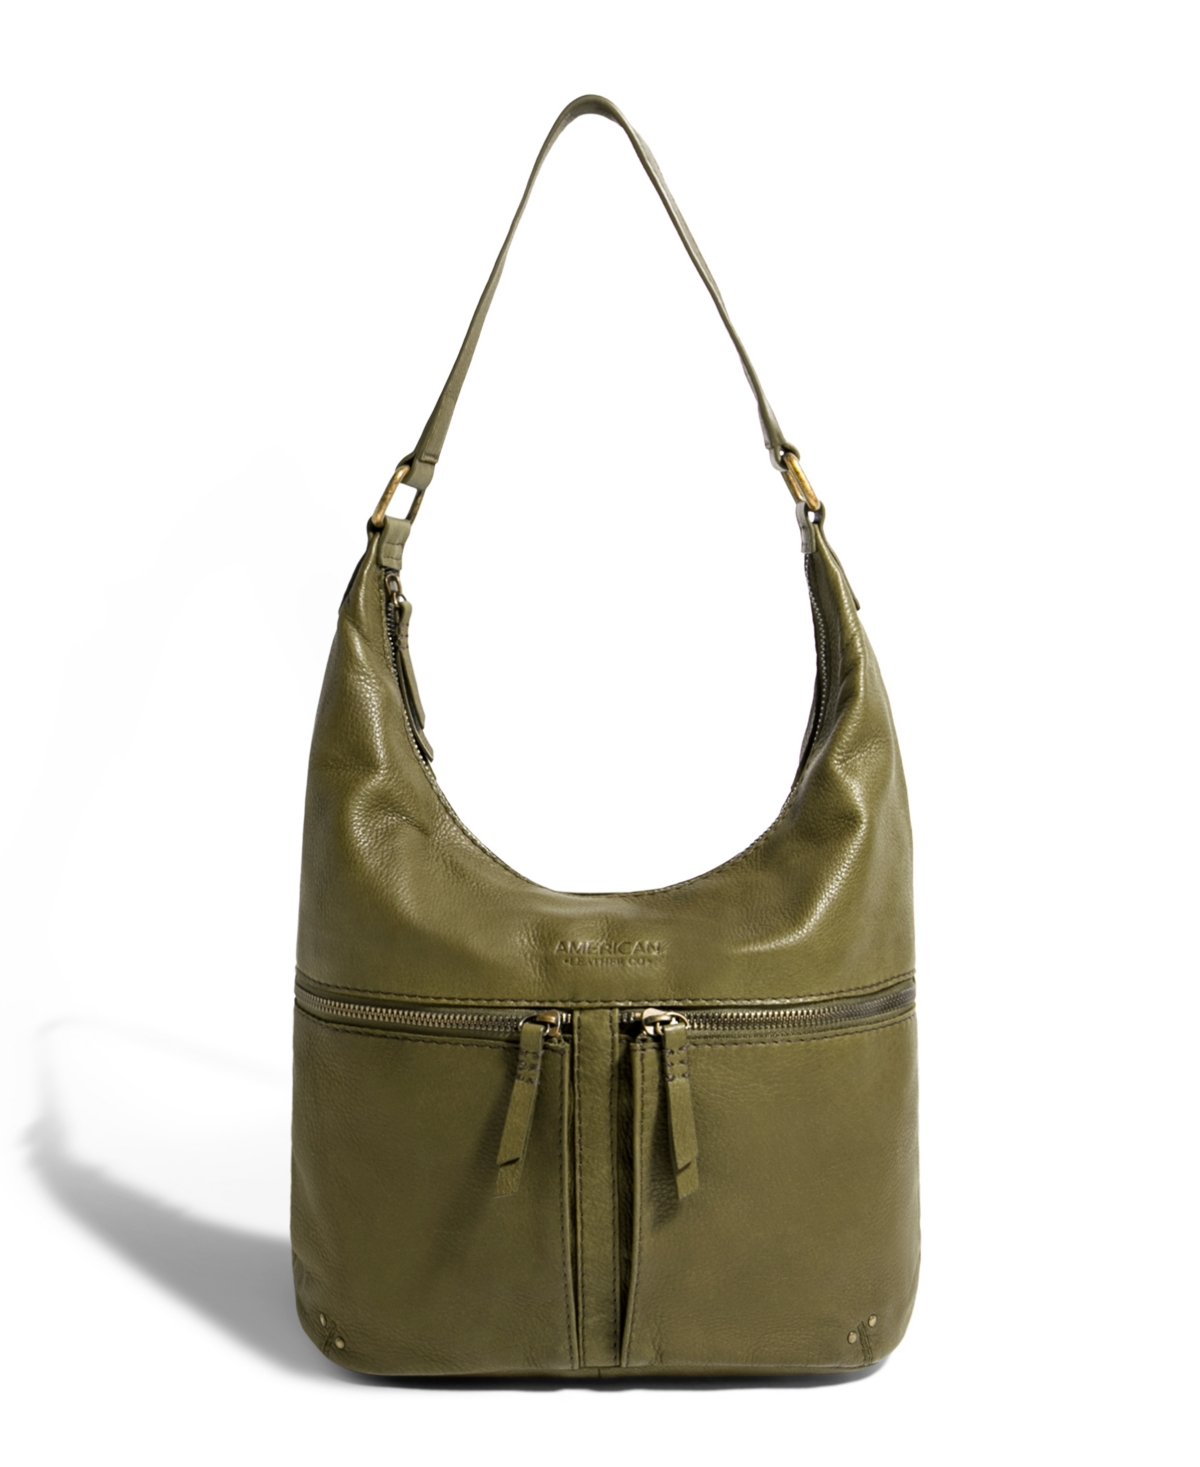 American Leather Co. Women's Hanover Hobo Bag In Grove Smooth